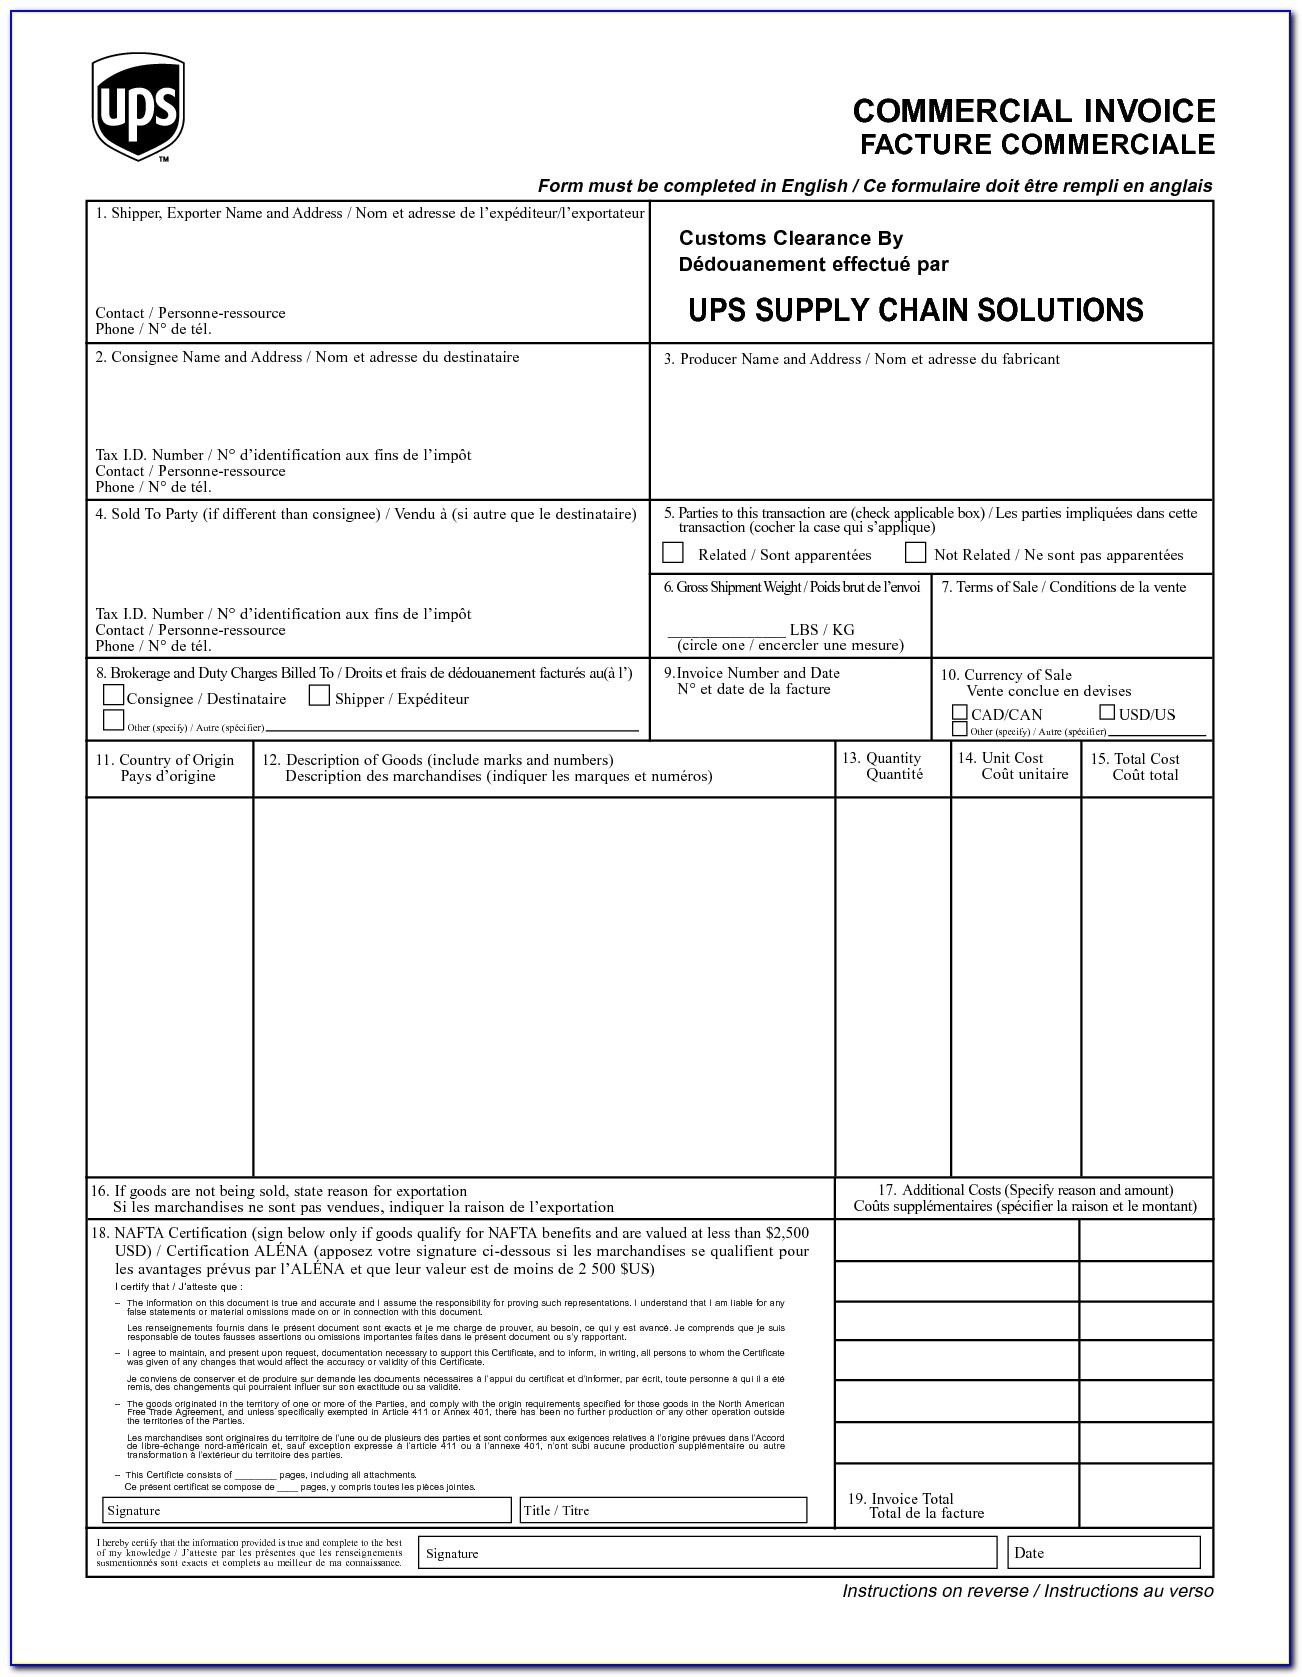 Commercial Invoice Template Canada Customs